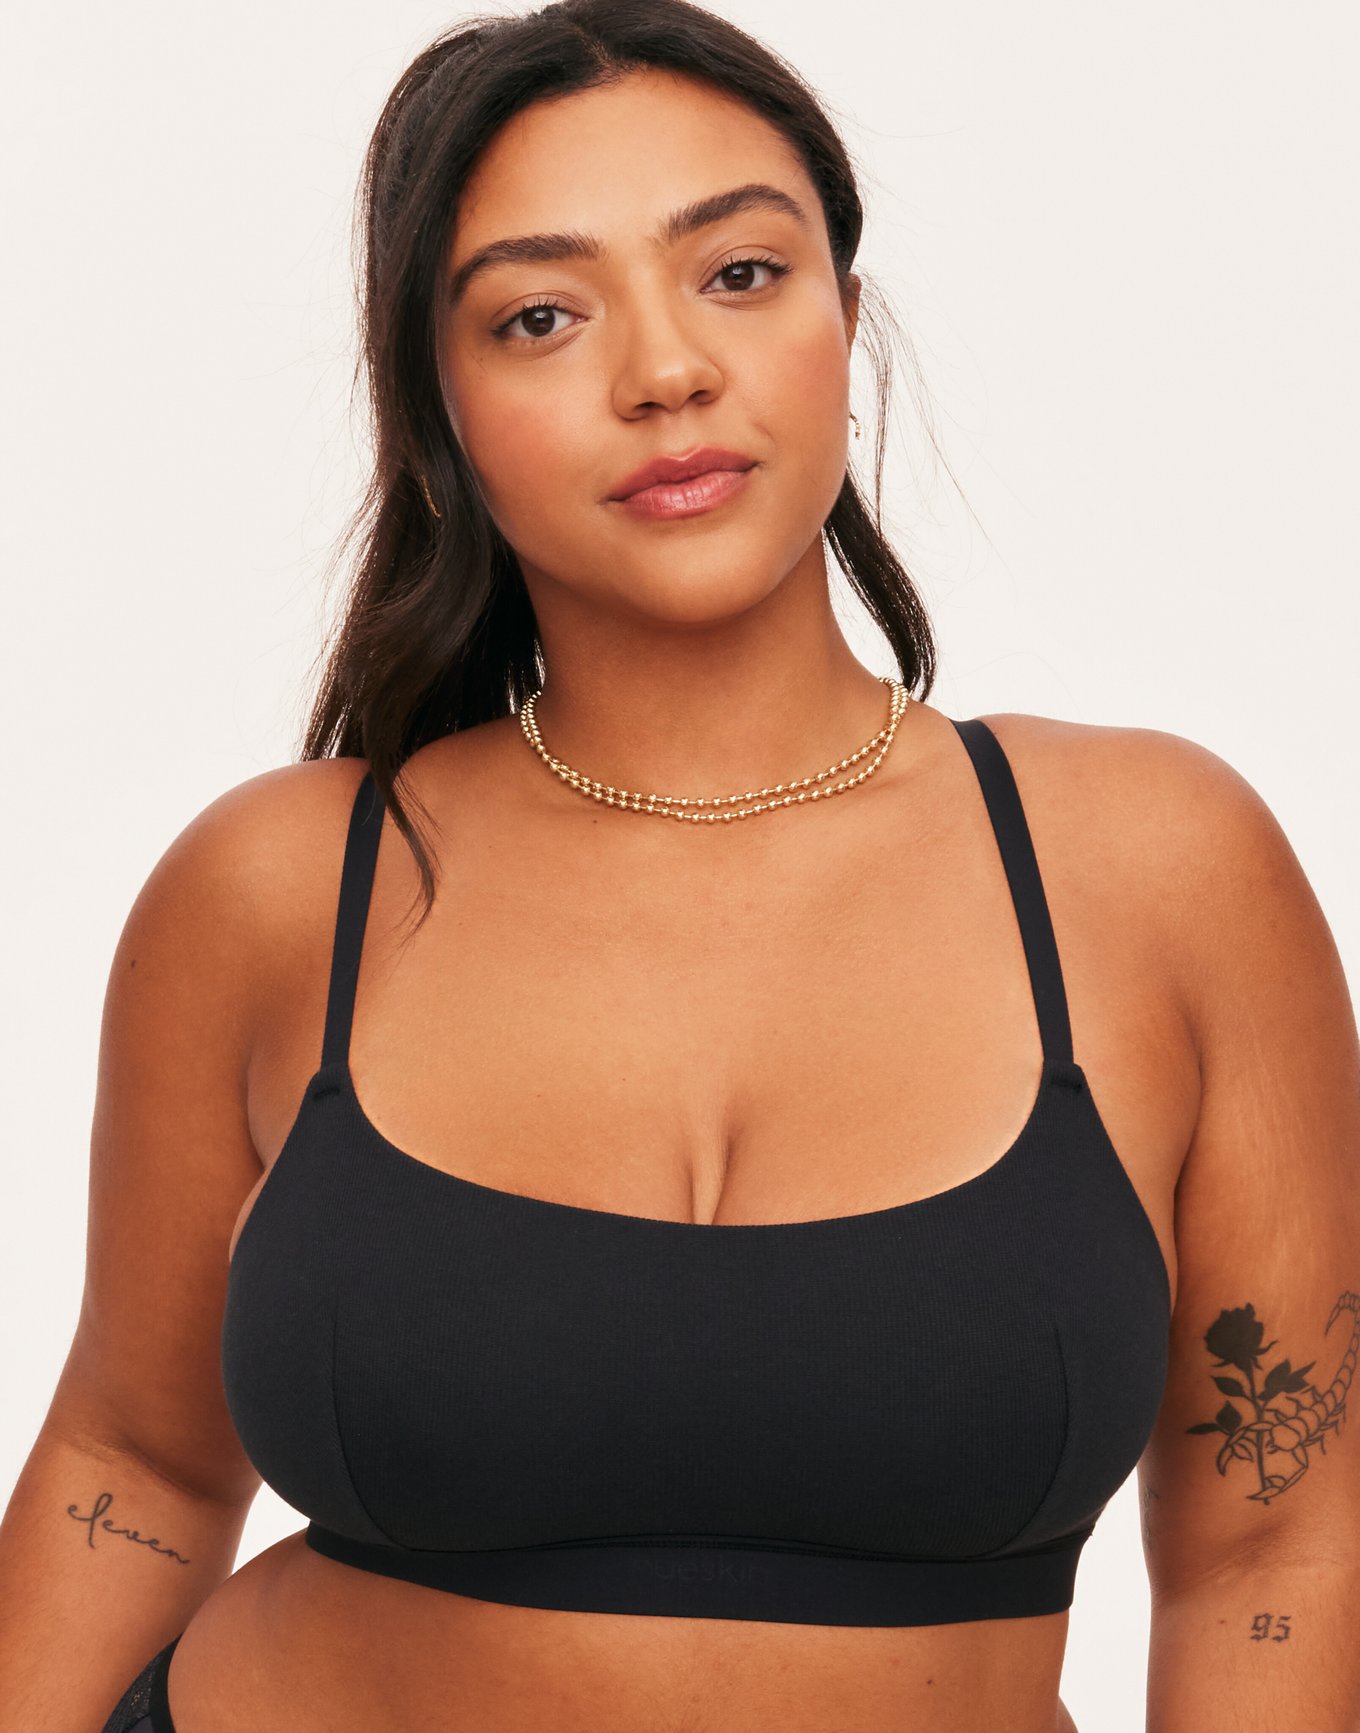 13 Lounge-Worthy Bralettes to Really Live In